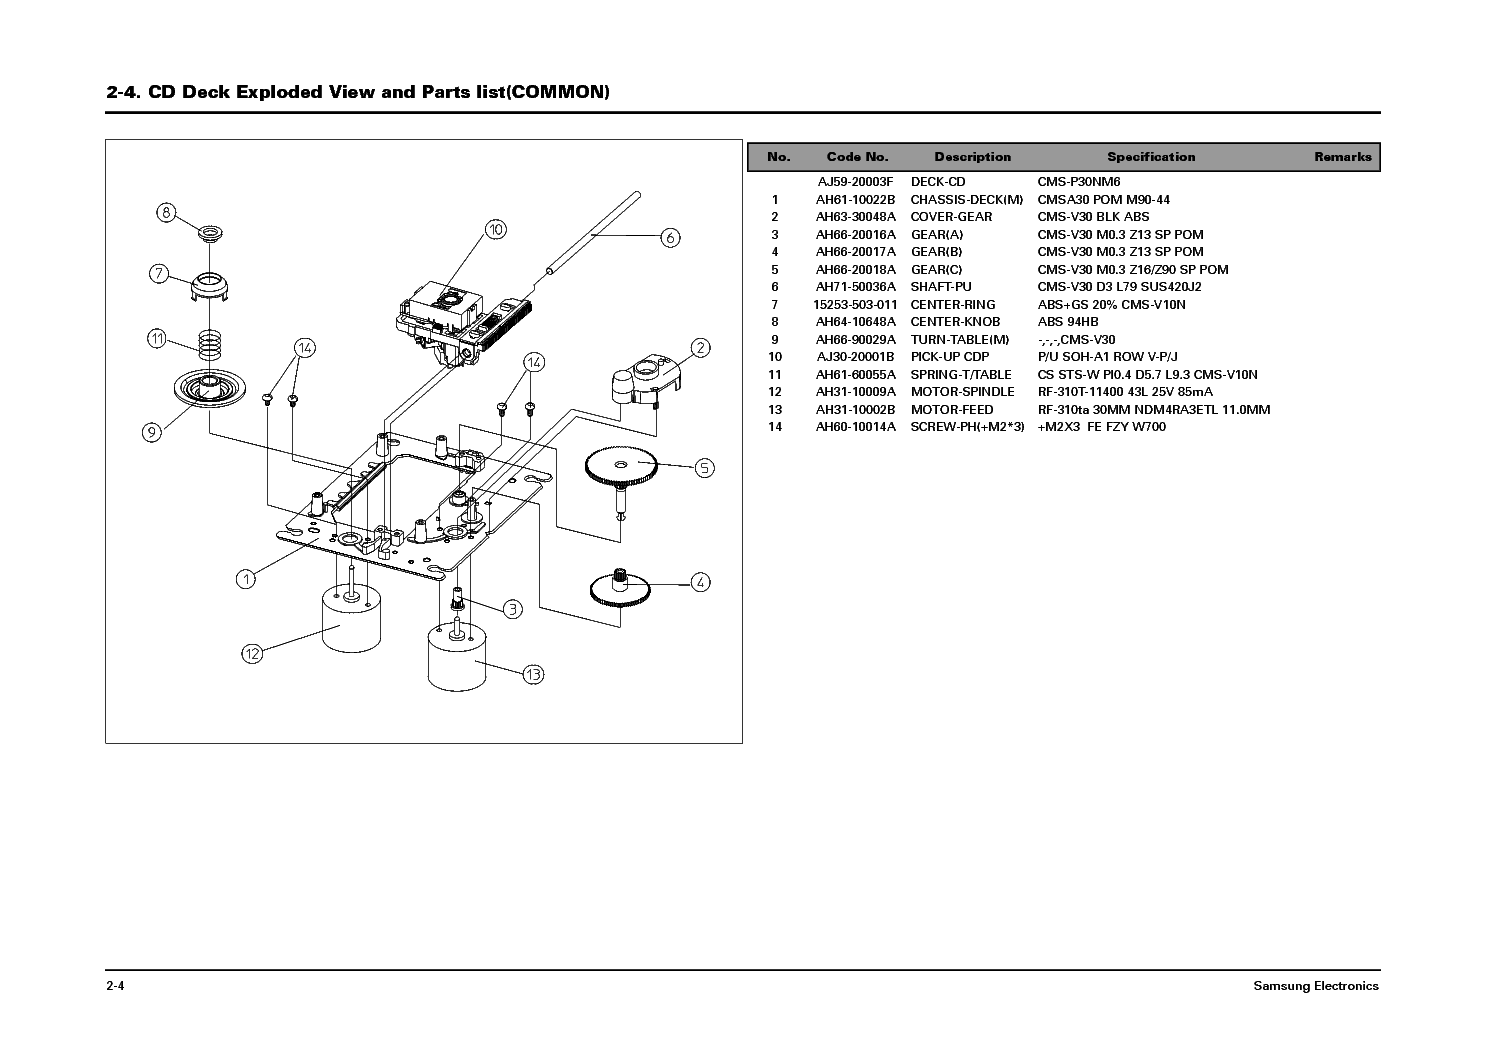 SAMSUNG MM-29 39 SM 2 service manual (2nd page)